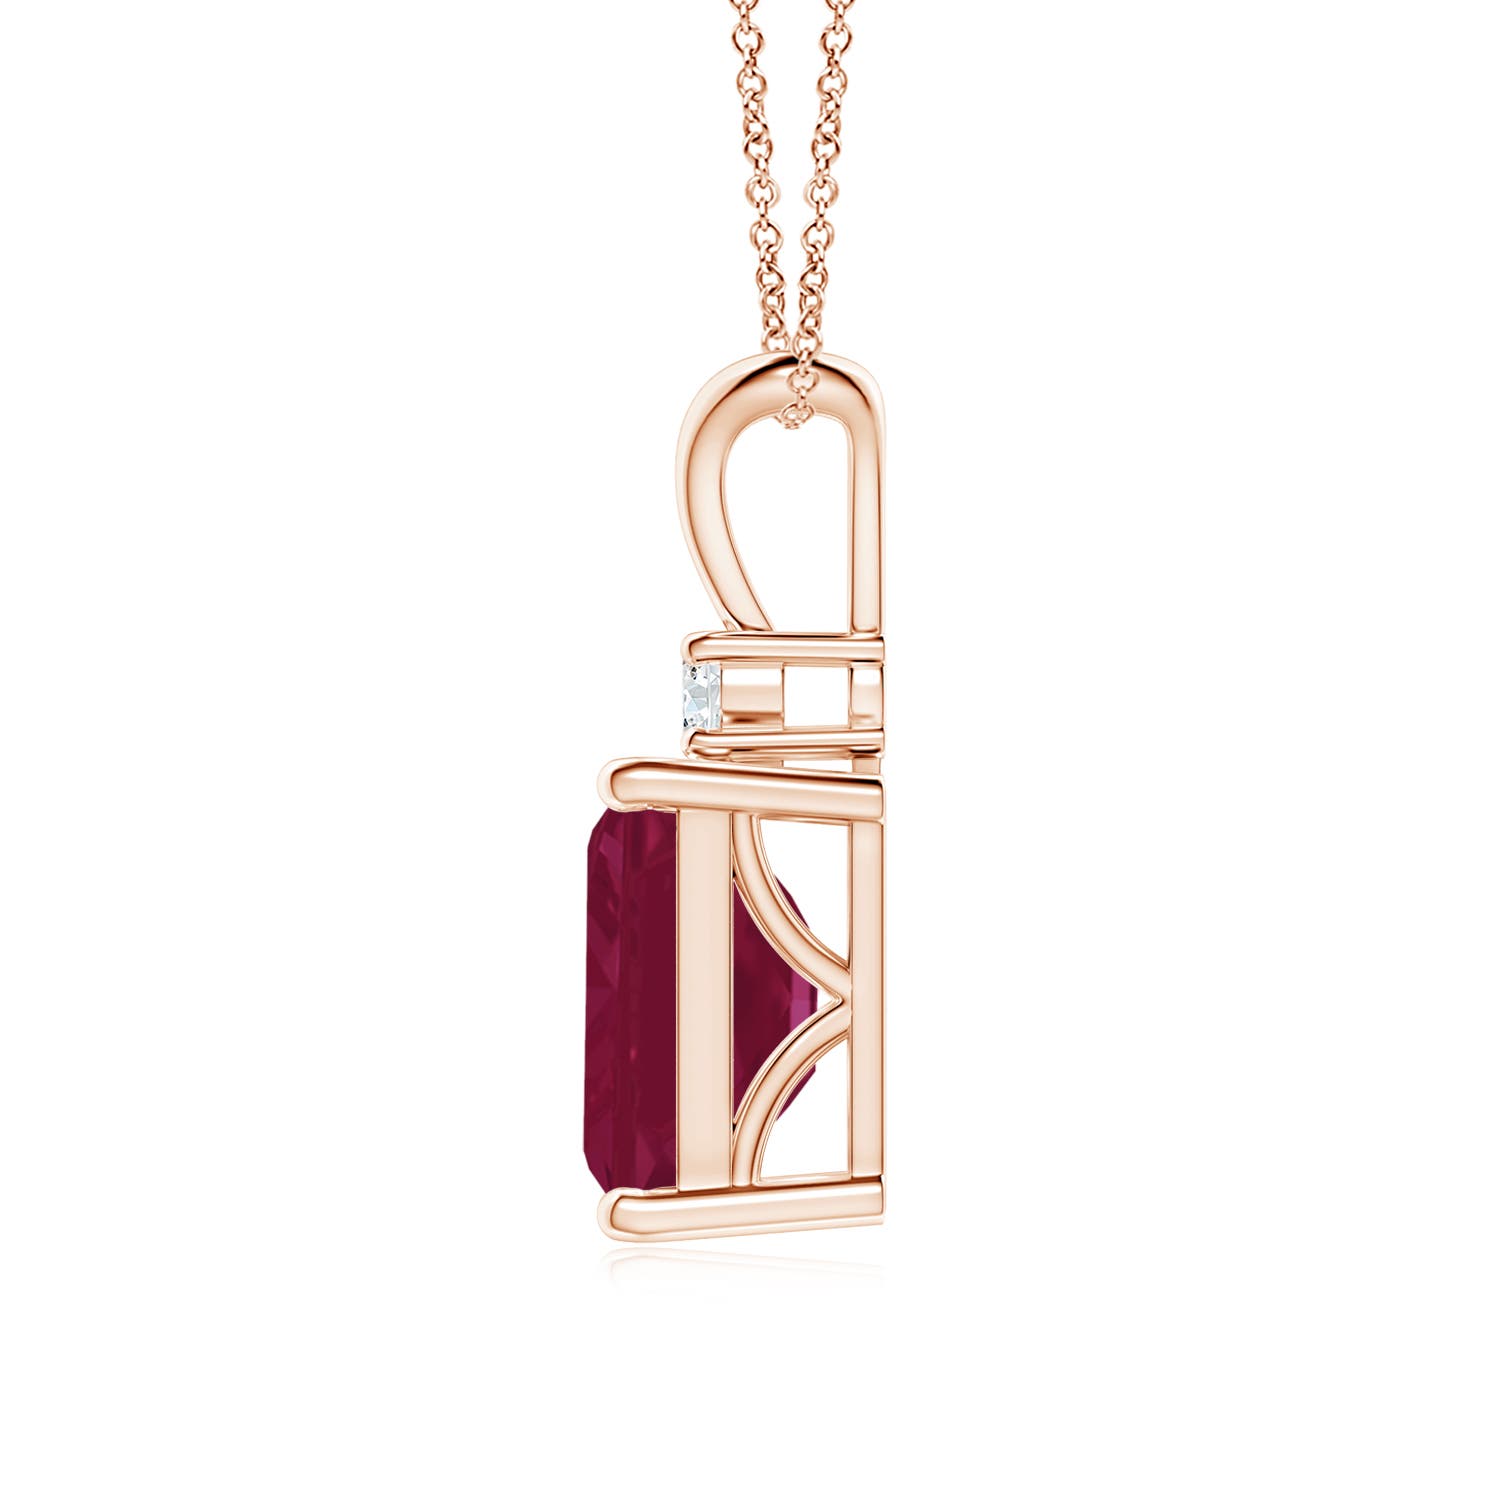 A - Ruby / 3.07 CT / 14 KT Rose Gold